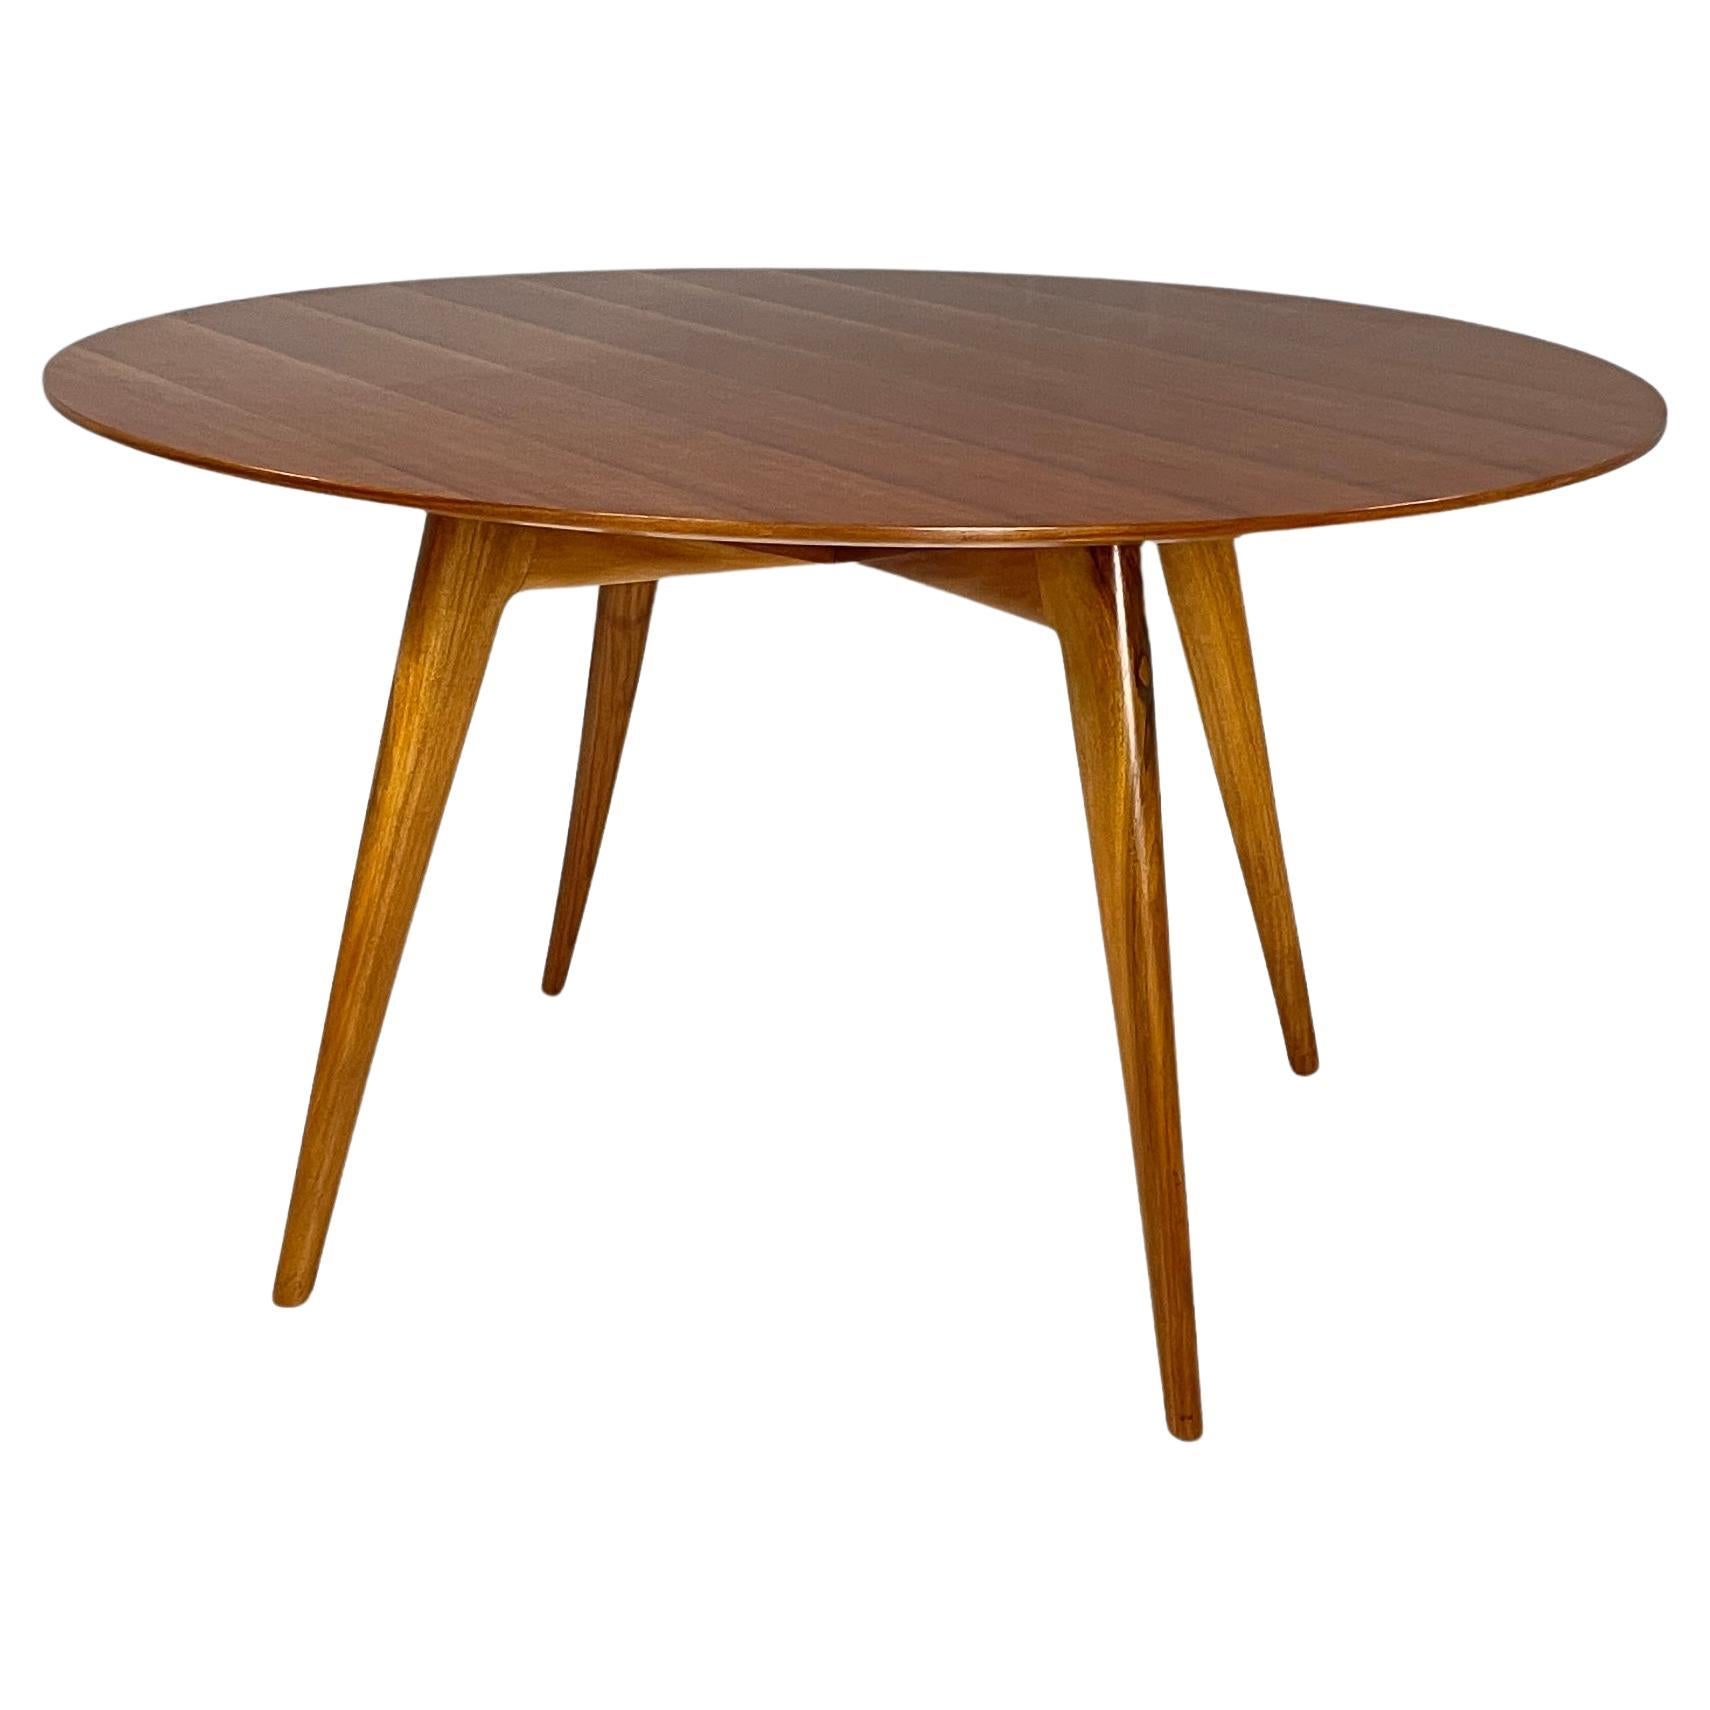 Italian mid-century modern Wooden dining table with extension, 1960s For Sale